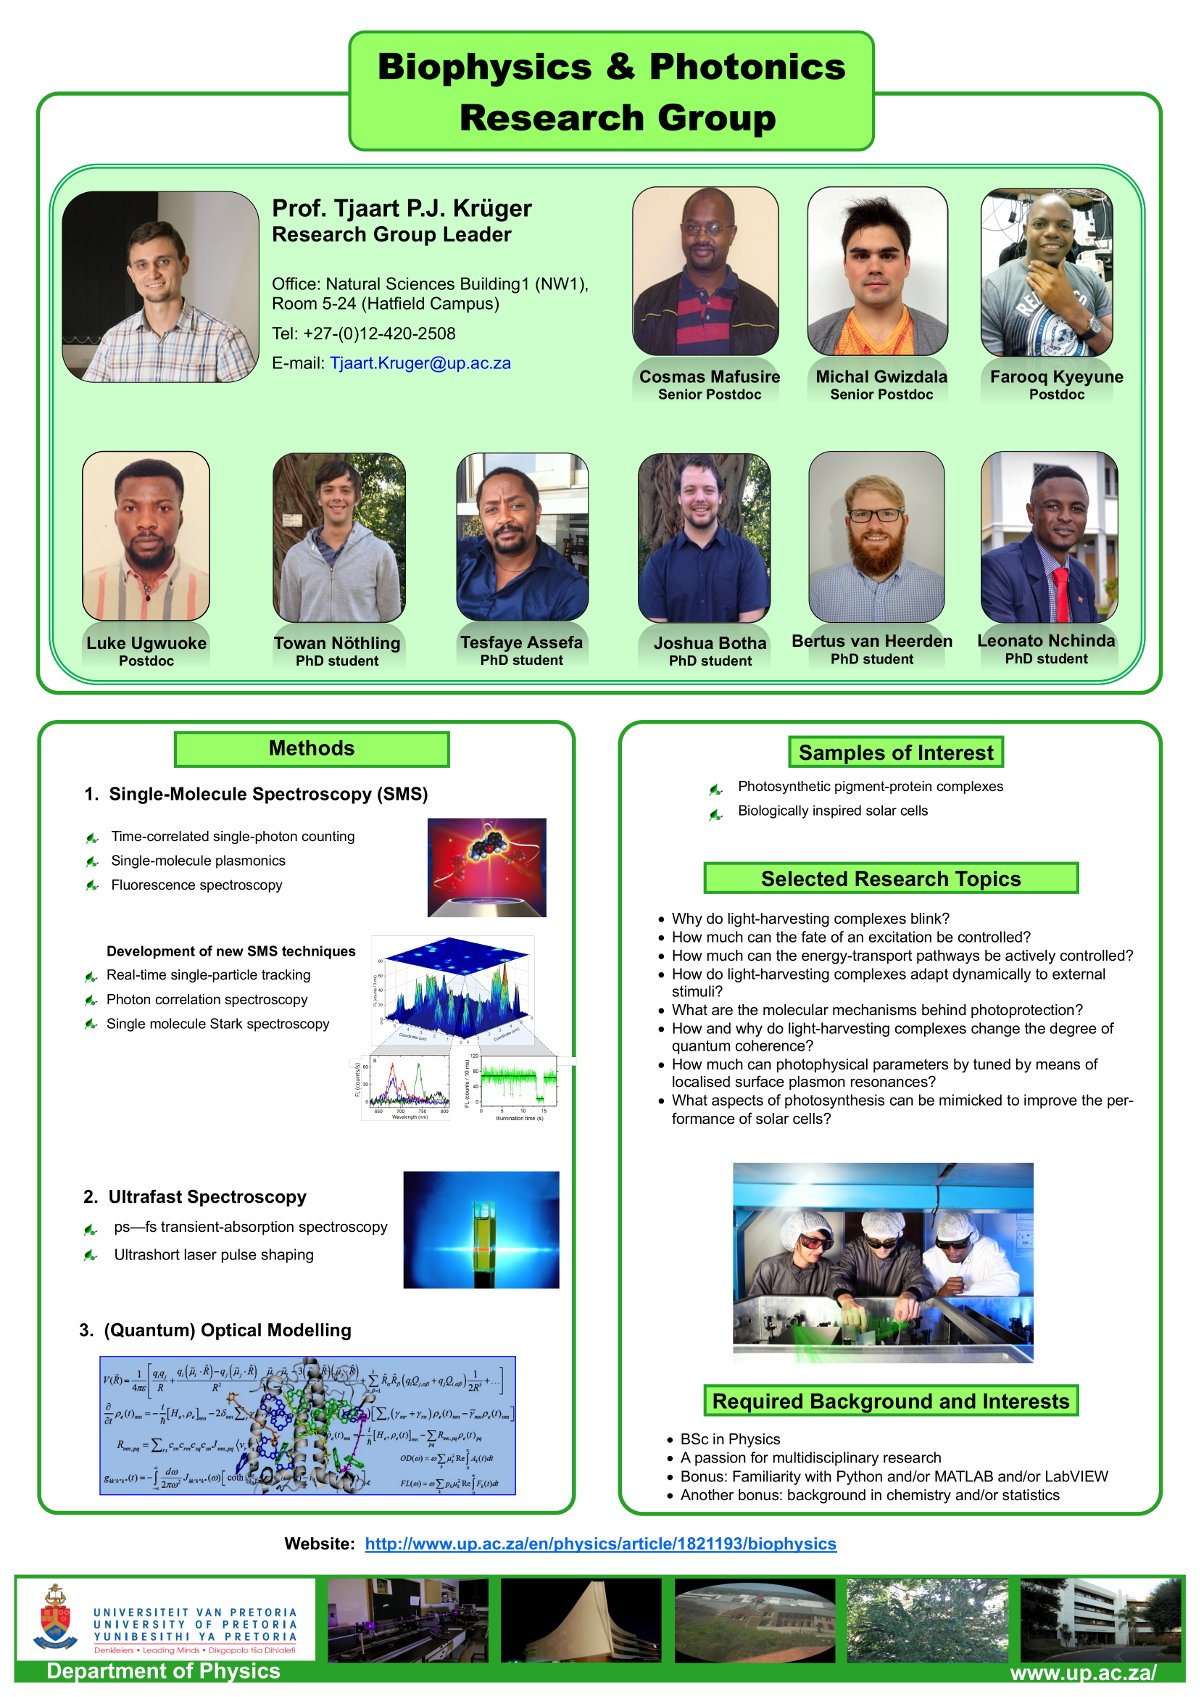 Carbon technology, materials and nano-Magnetism research group poster